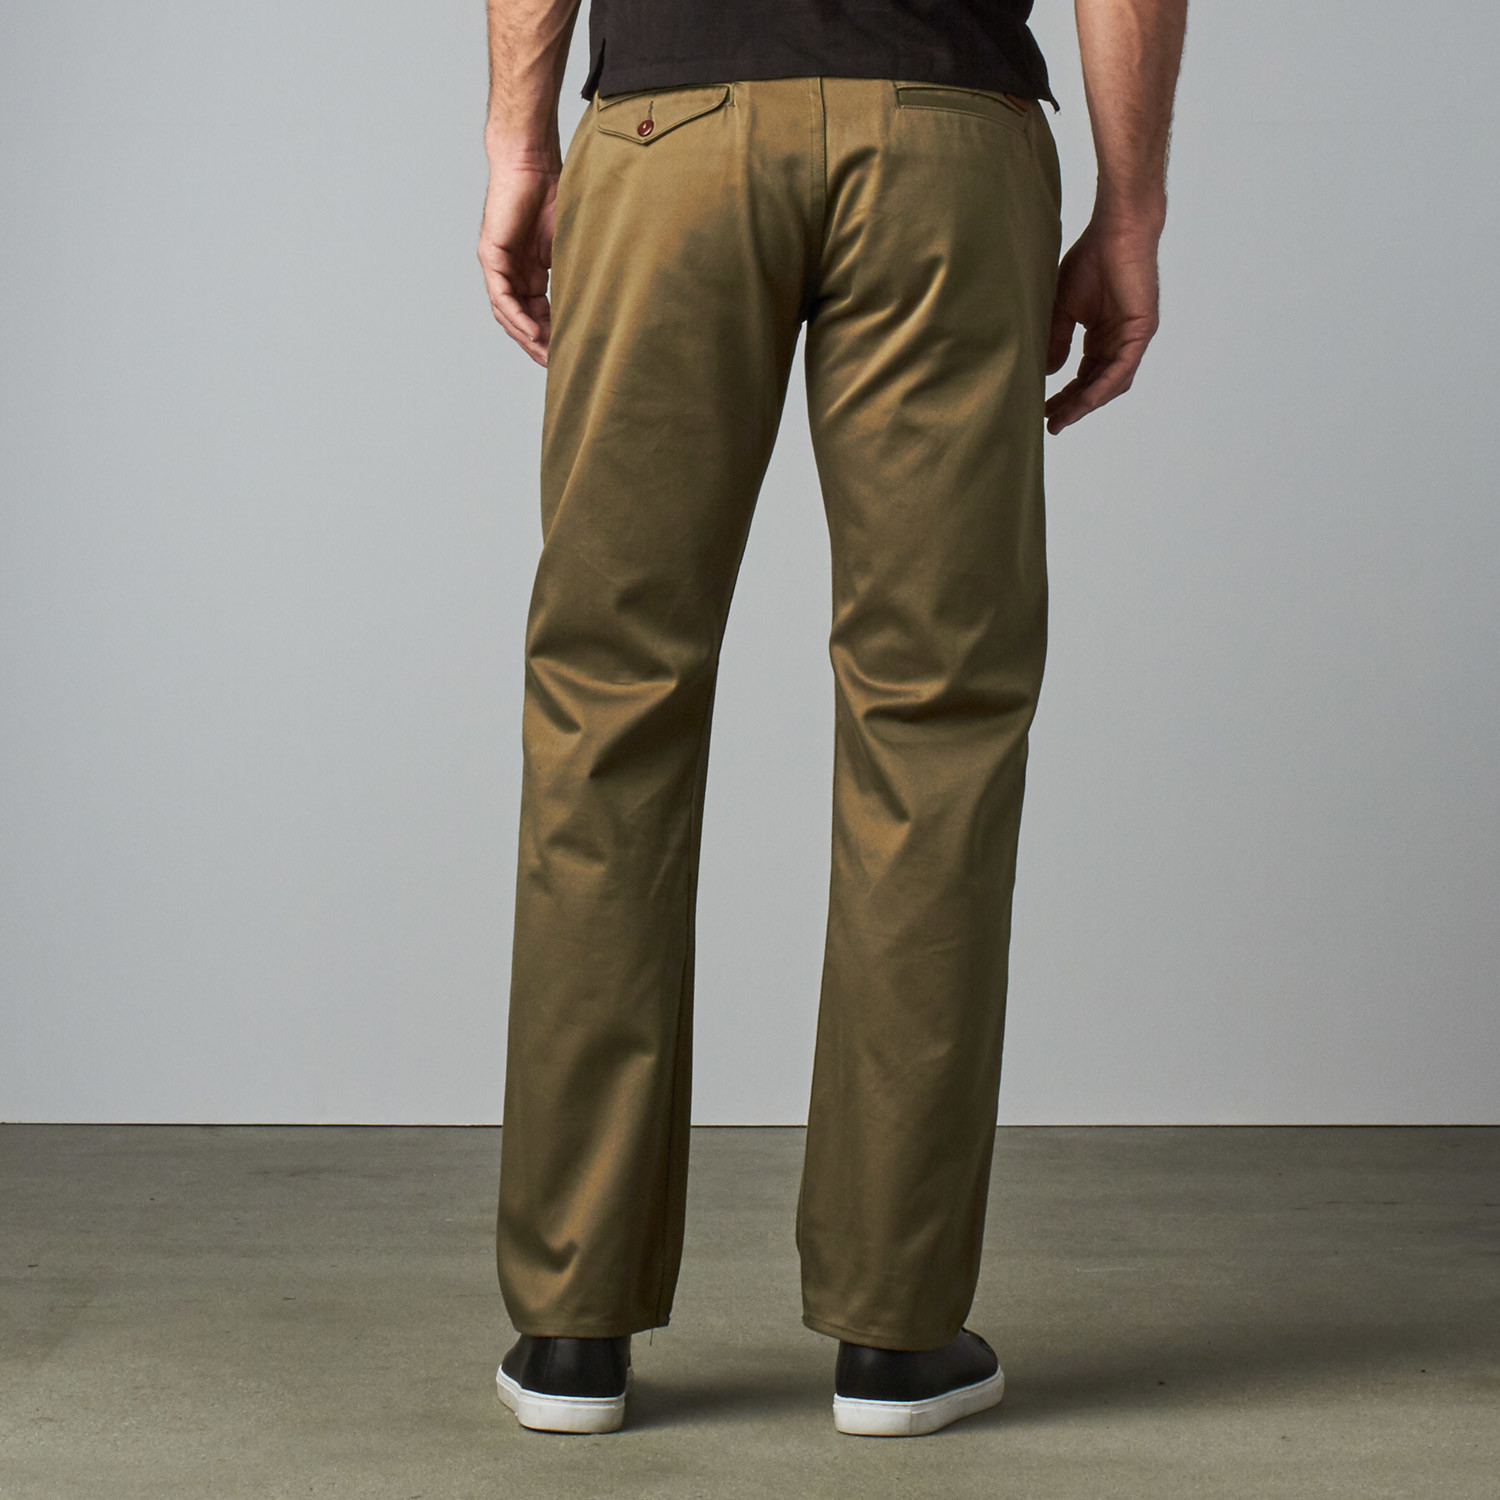 Workers Chino Relaxed Fit Pant // Olive (29WX32L) - FreeNote Clothing ...